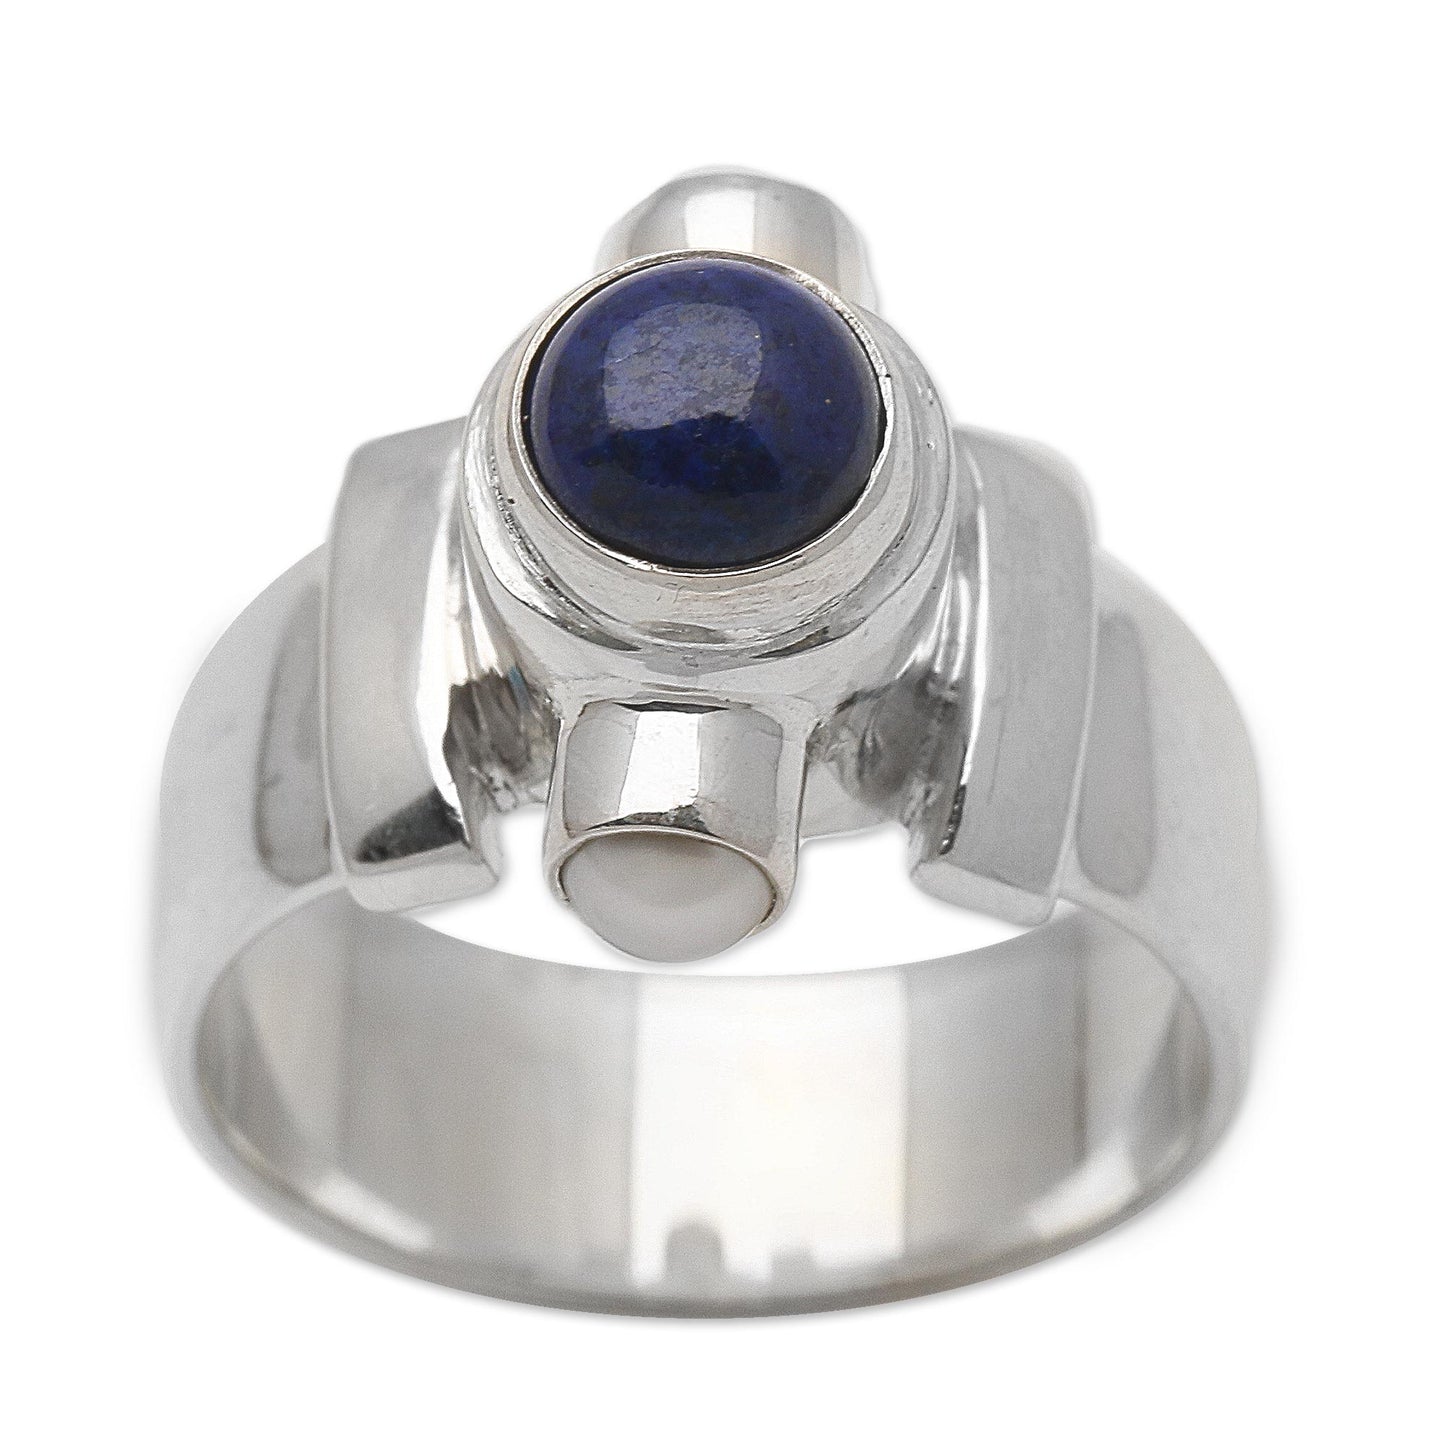 Direction Handcrafted Sterling Silver and Lapis Lazuli Ring